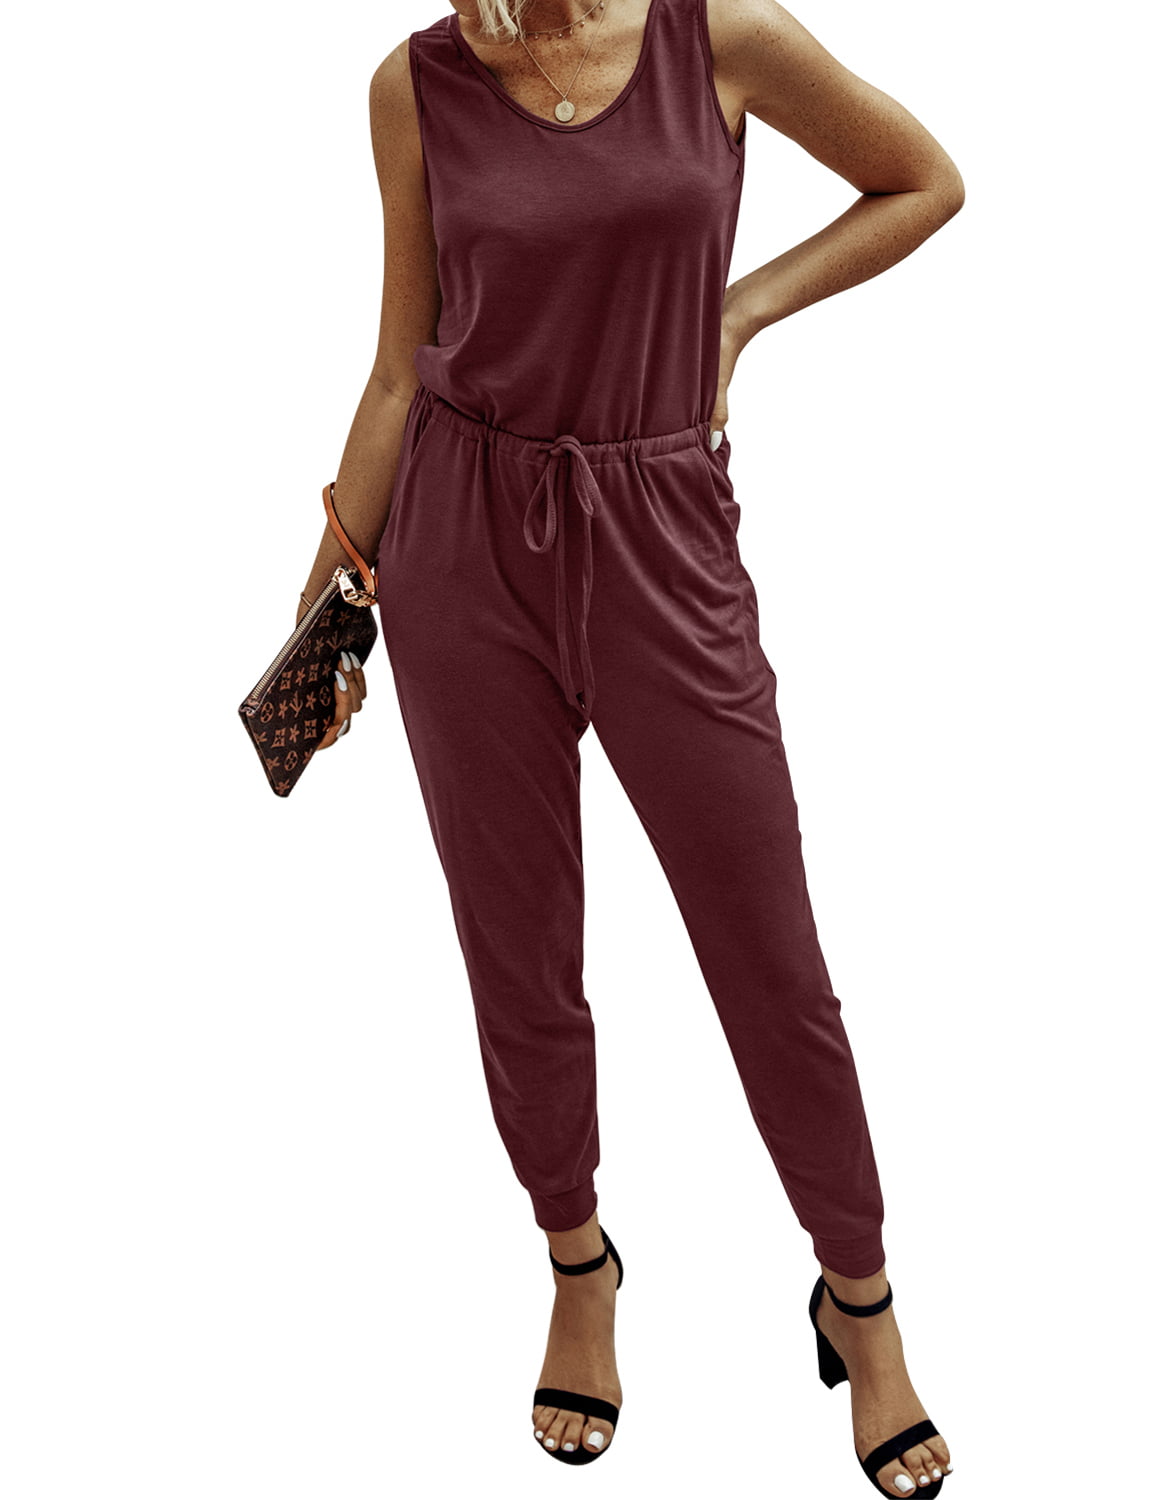 2019 Newest Women Casual Loose Camisole Sleeveless Solid Spring Jumpsuits Red 